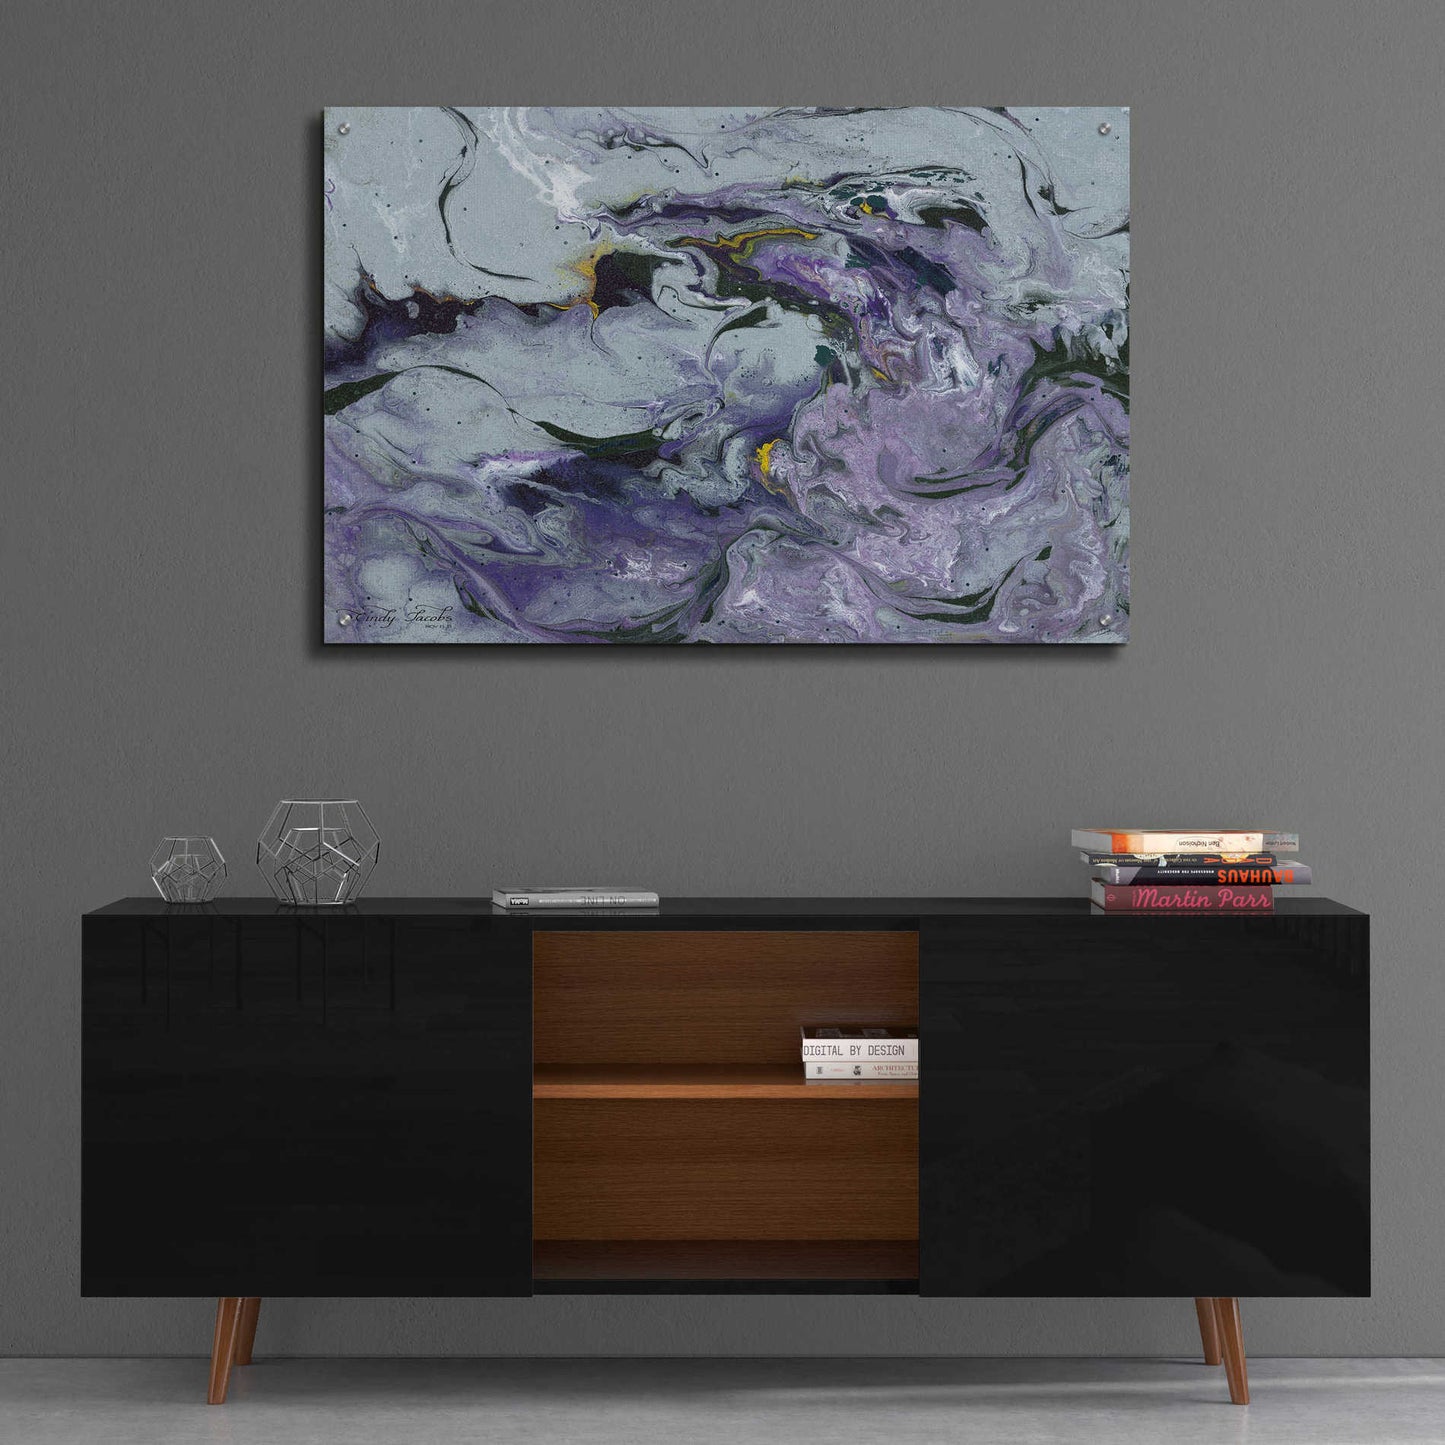 Epic Art 'Abstract in Purple IV' by Cindy Jacobs, Acrylic Glass Wall Art,36x24